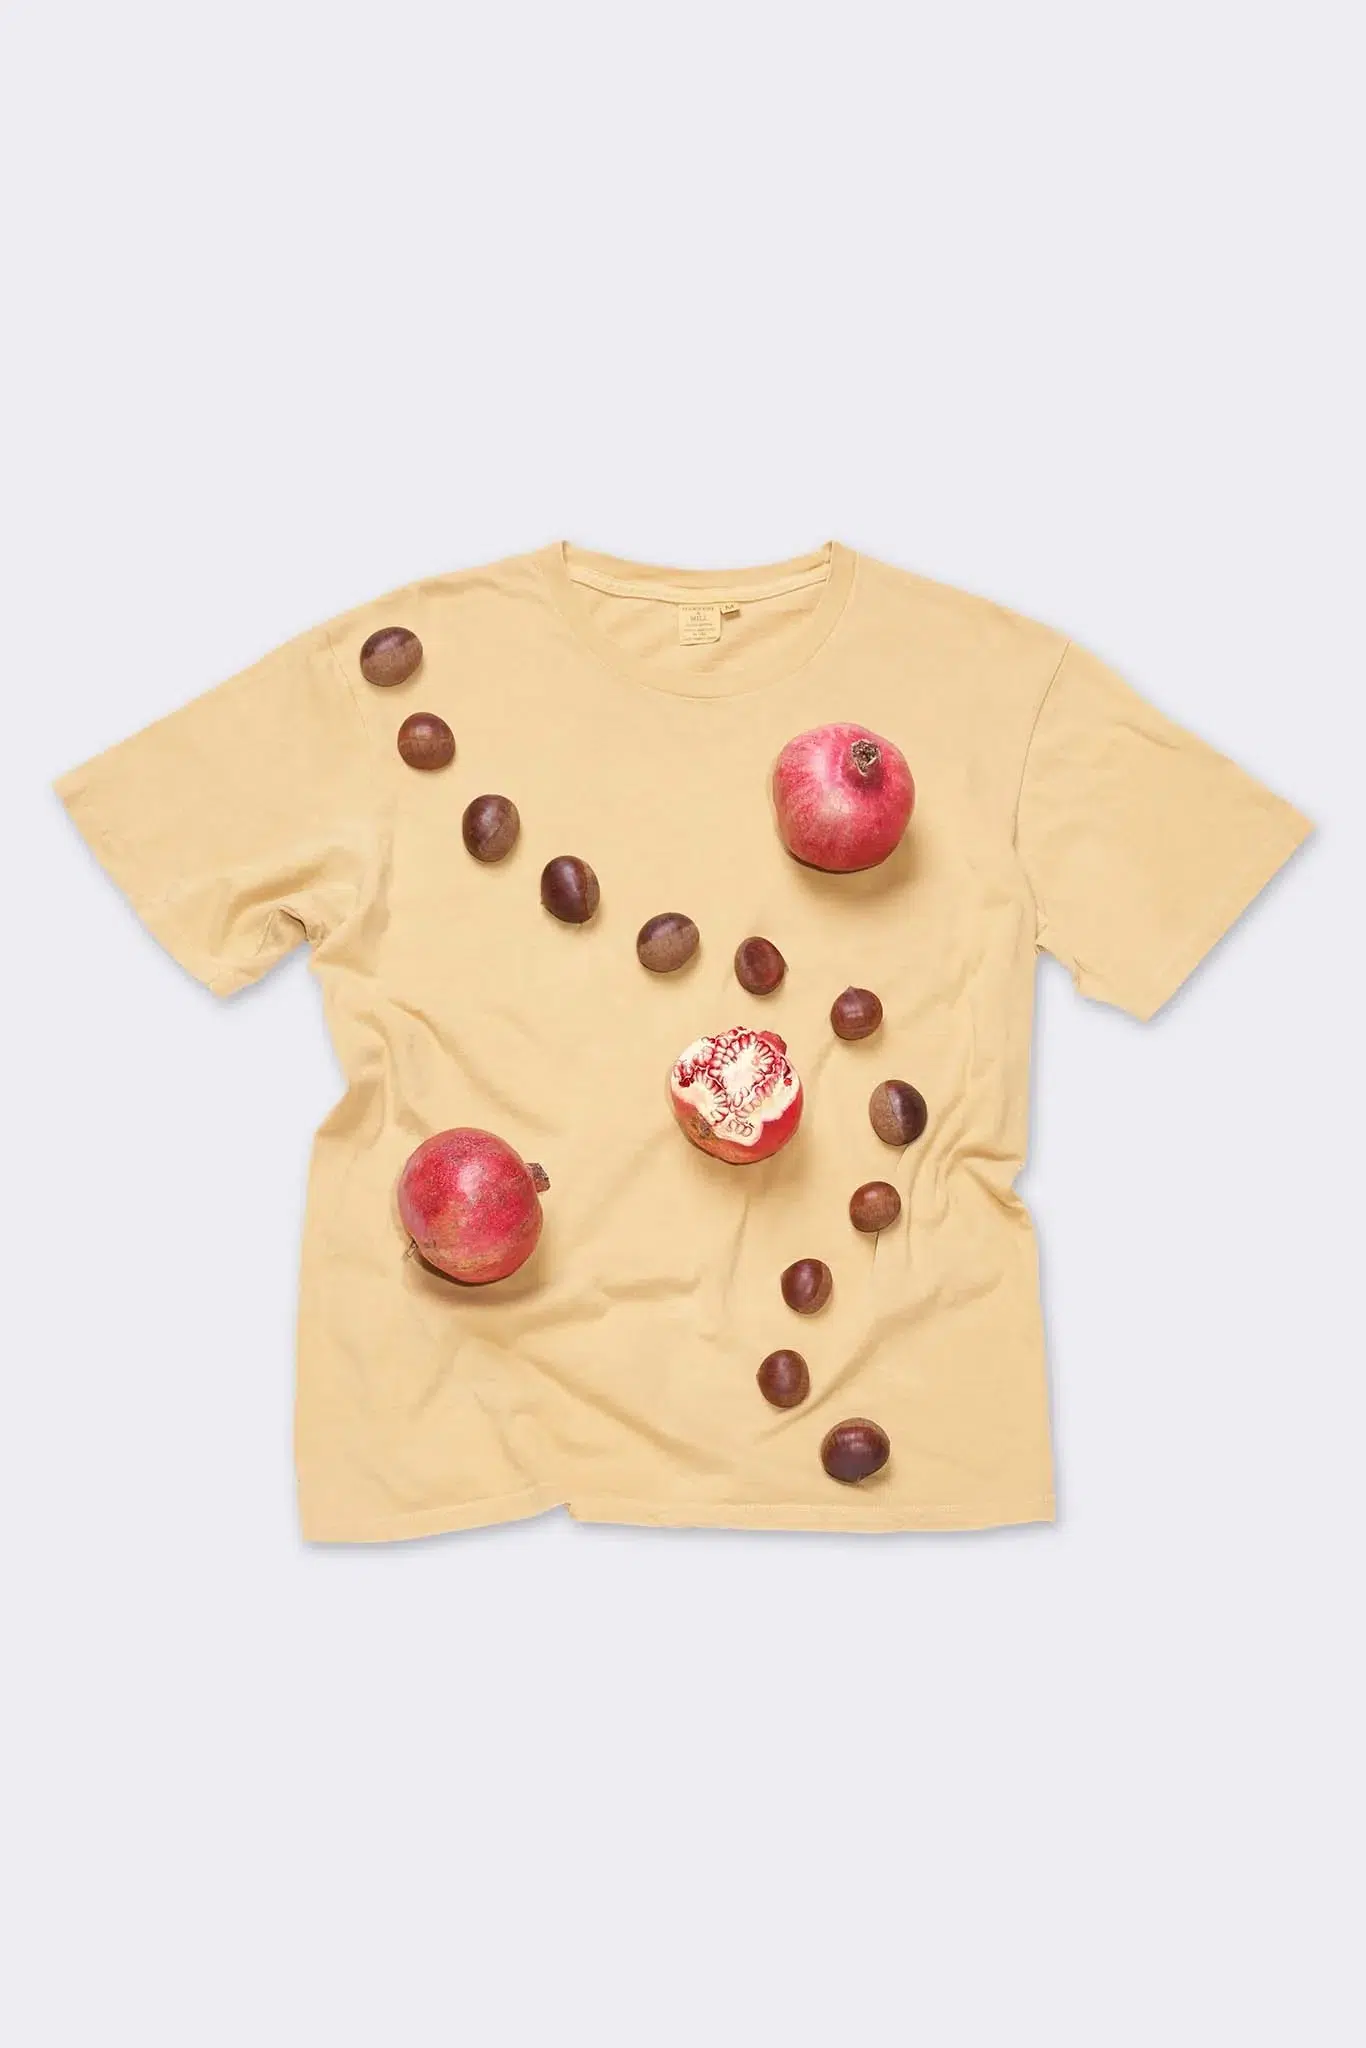 natural dye yellow tee shirt flatlay with pomegranates and avocado seeds laying on top